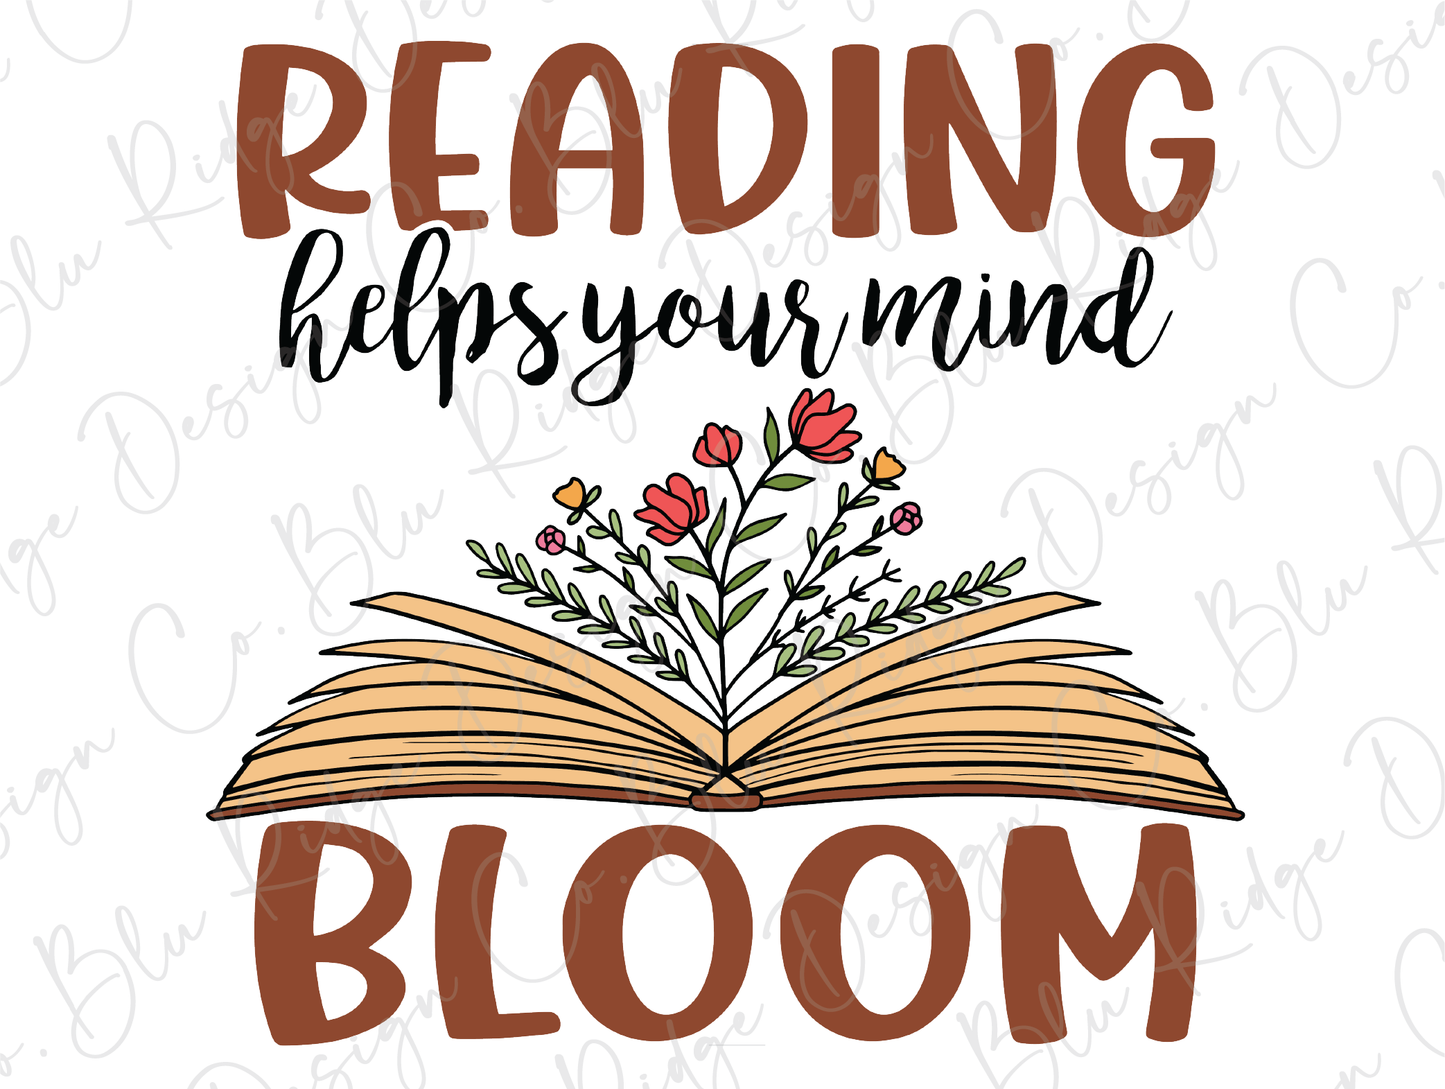 Reading helps your mind Bloom Floral Books Direct To Film (DTF) Transfer